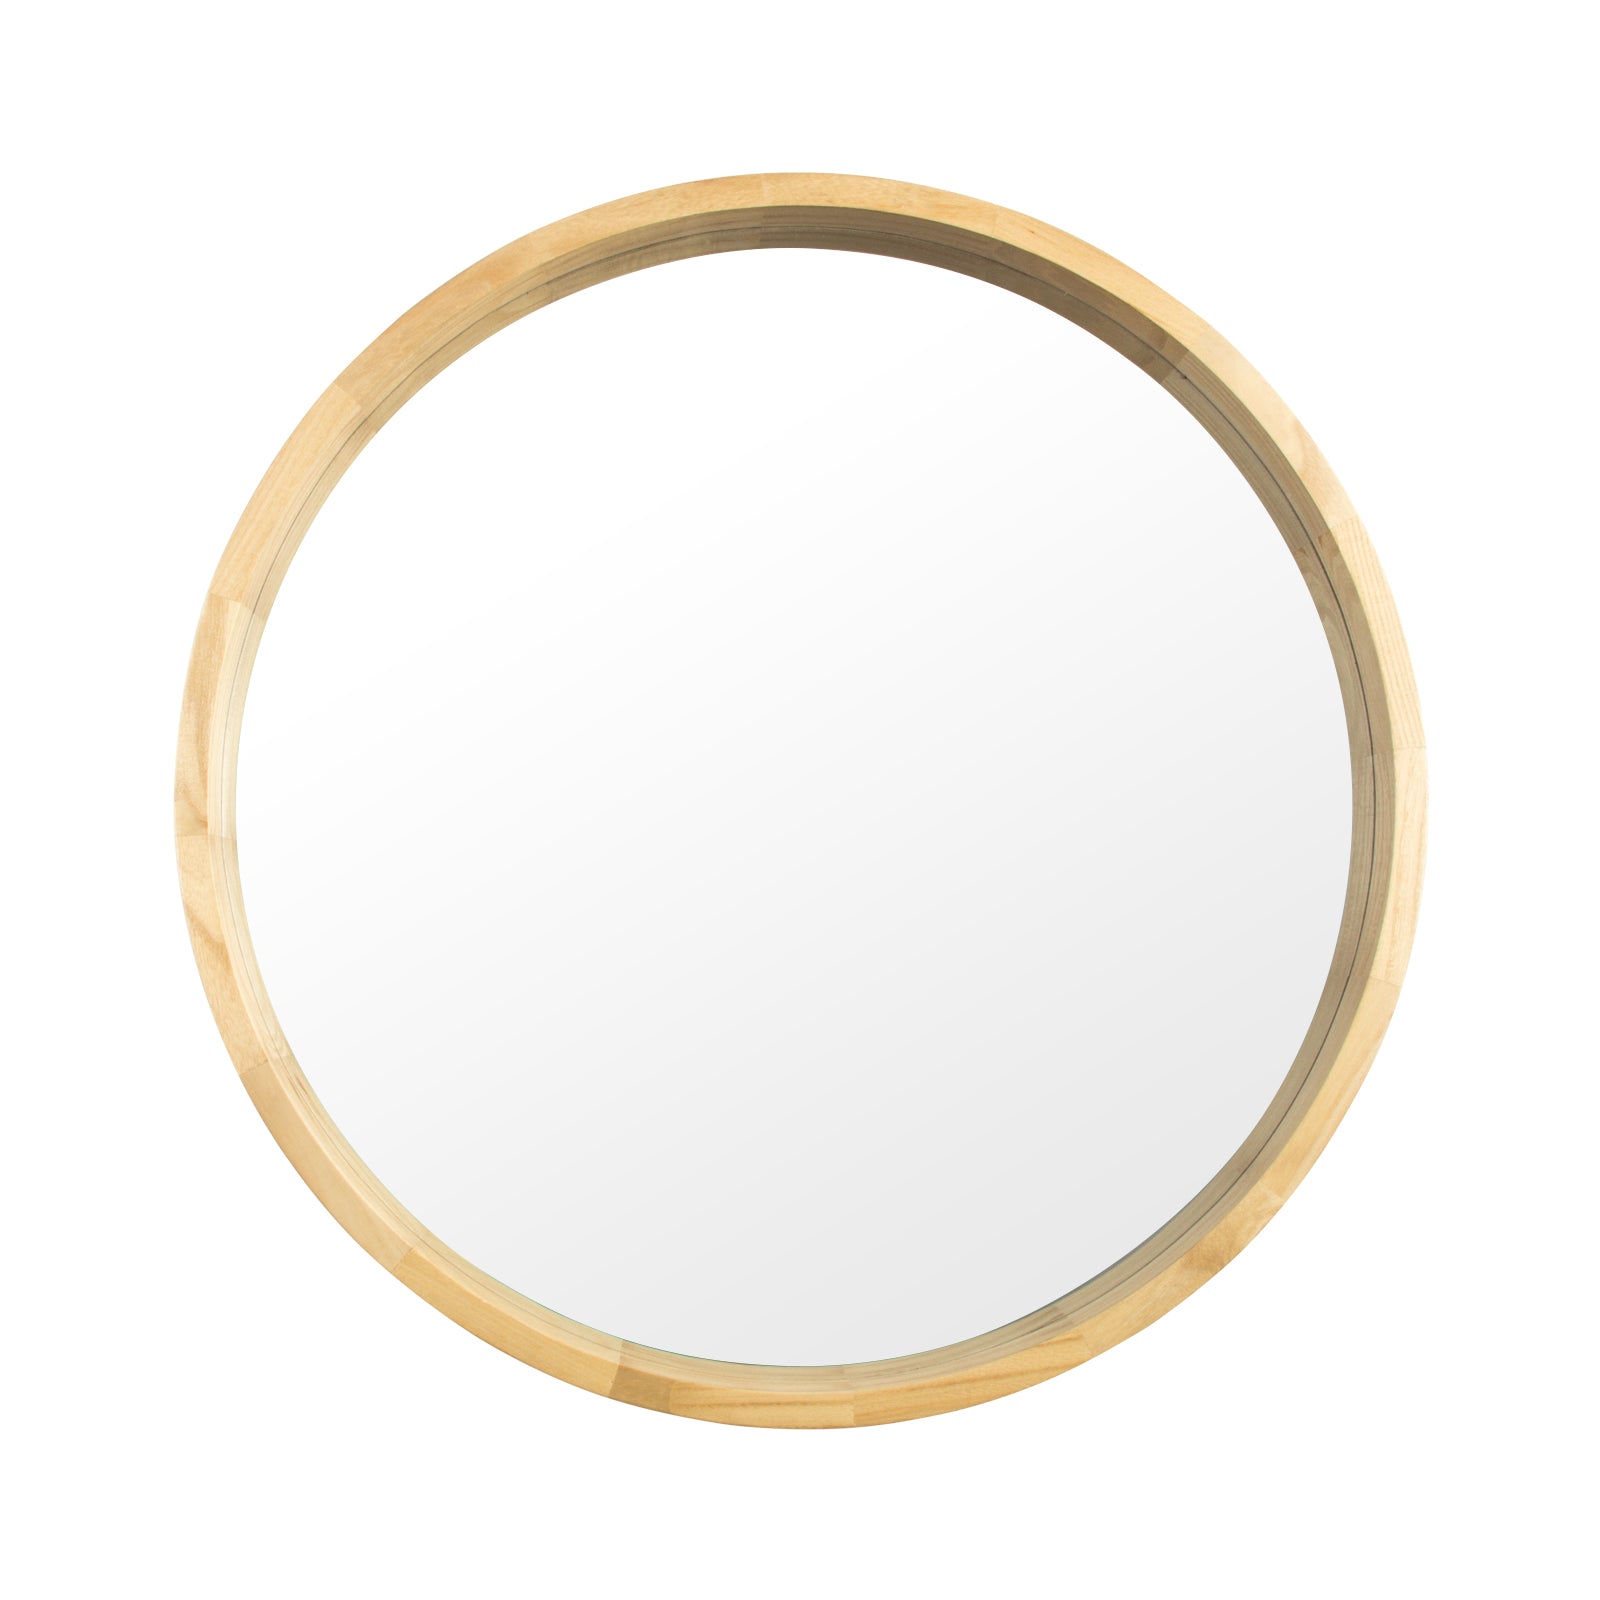 Circle Mirror with Wood Frame, Round Modern Decoration Large Mirror for Bathroom Living Room Bedroom Entryway, Walnut Natural, 30"